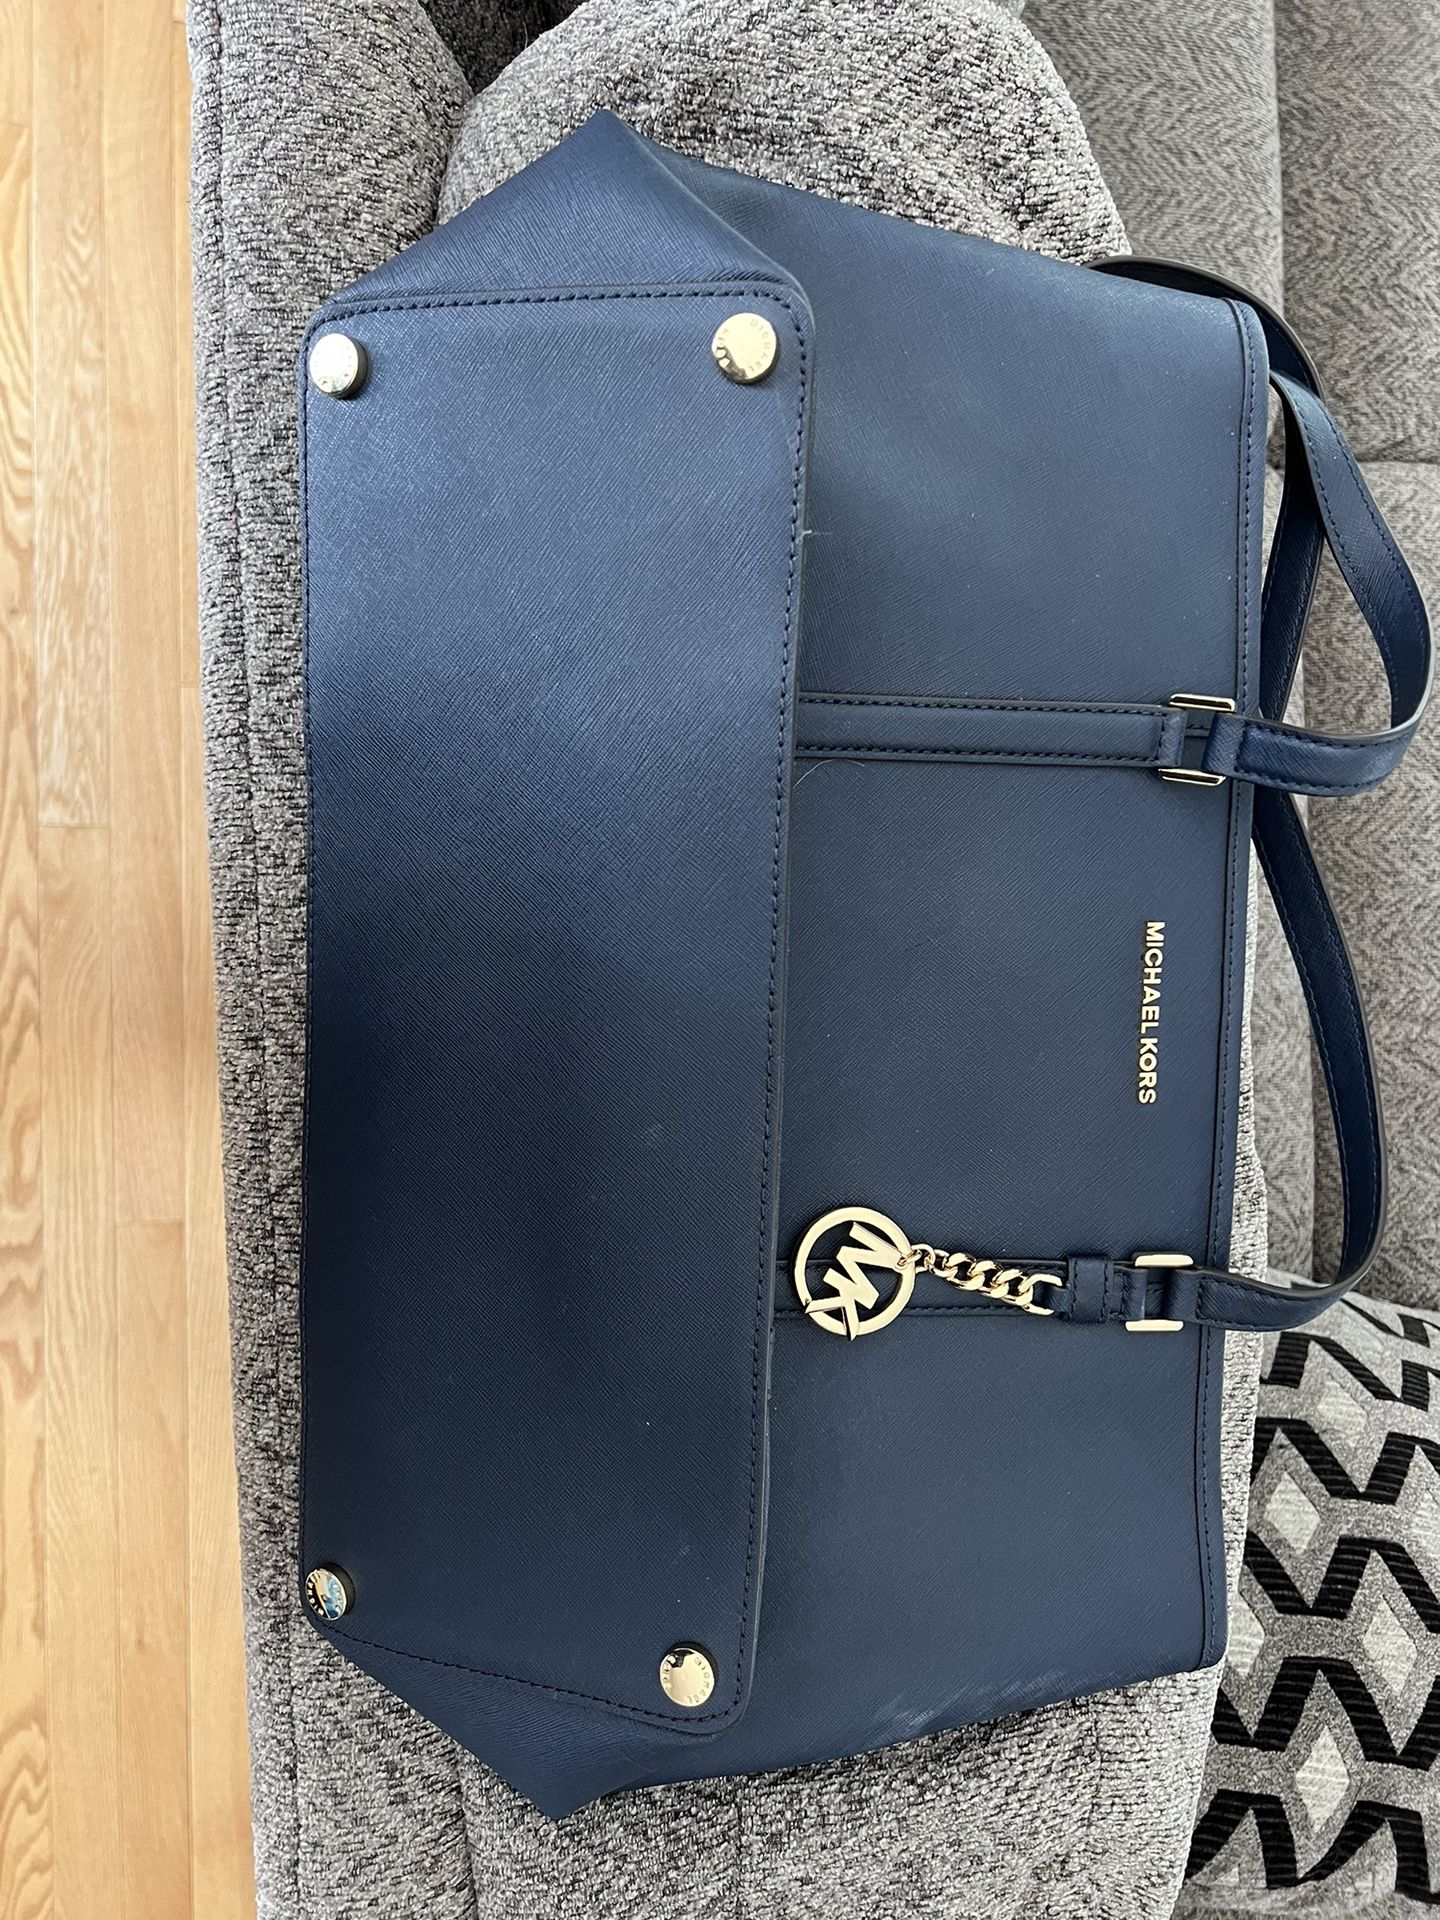 Michael Kors Travel Bag With Wallet